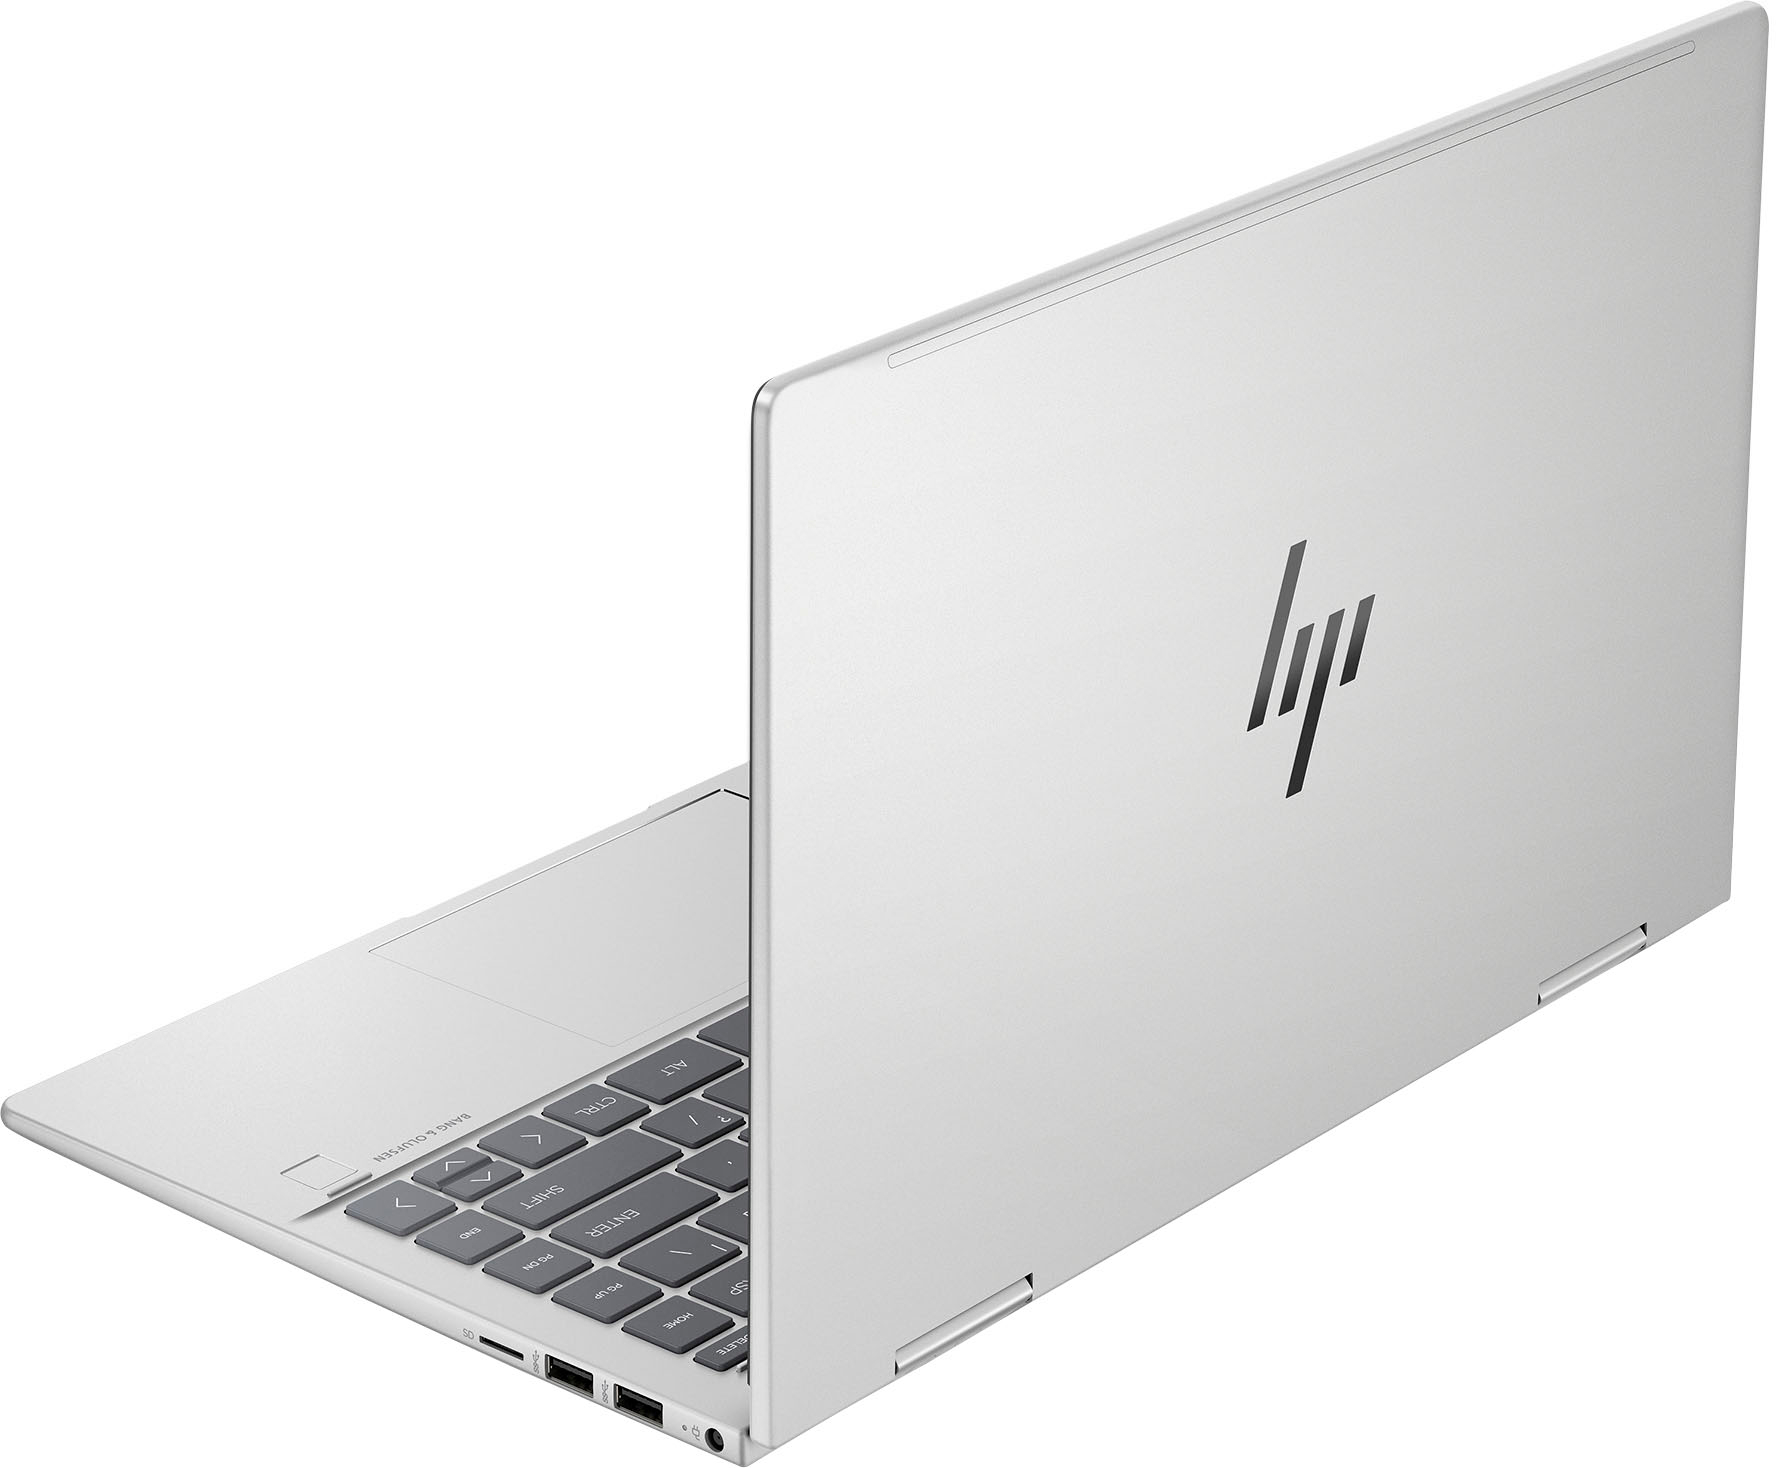 HP - ENVY 2-in-1 14" Full HD Touch-Screen Laptop - Intel Core i5 - 8GB Memory - 512GB SSD - Natural Silver